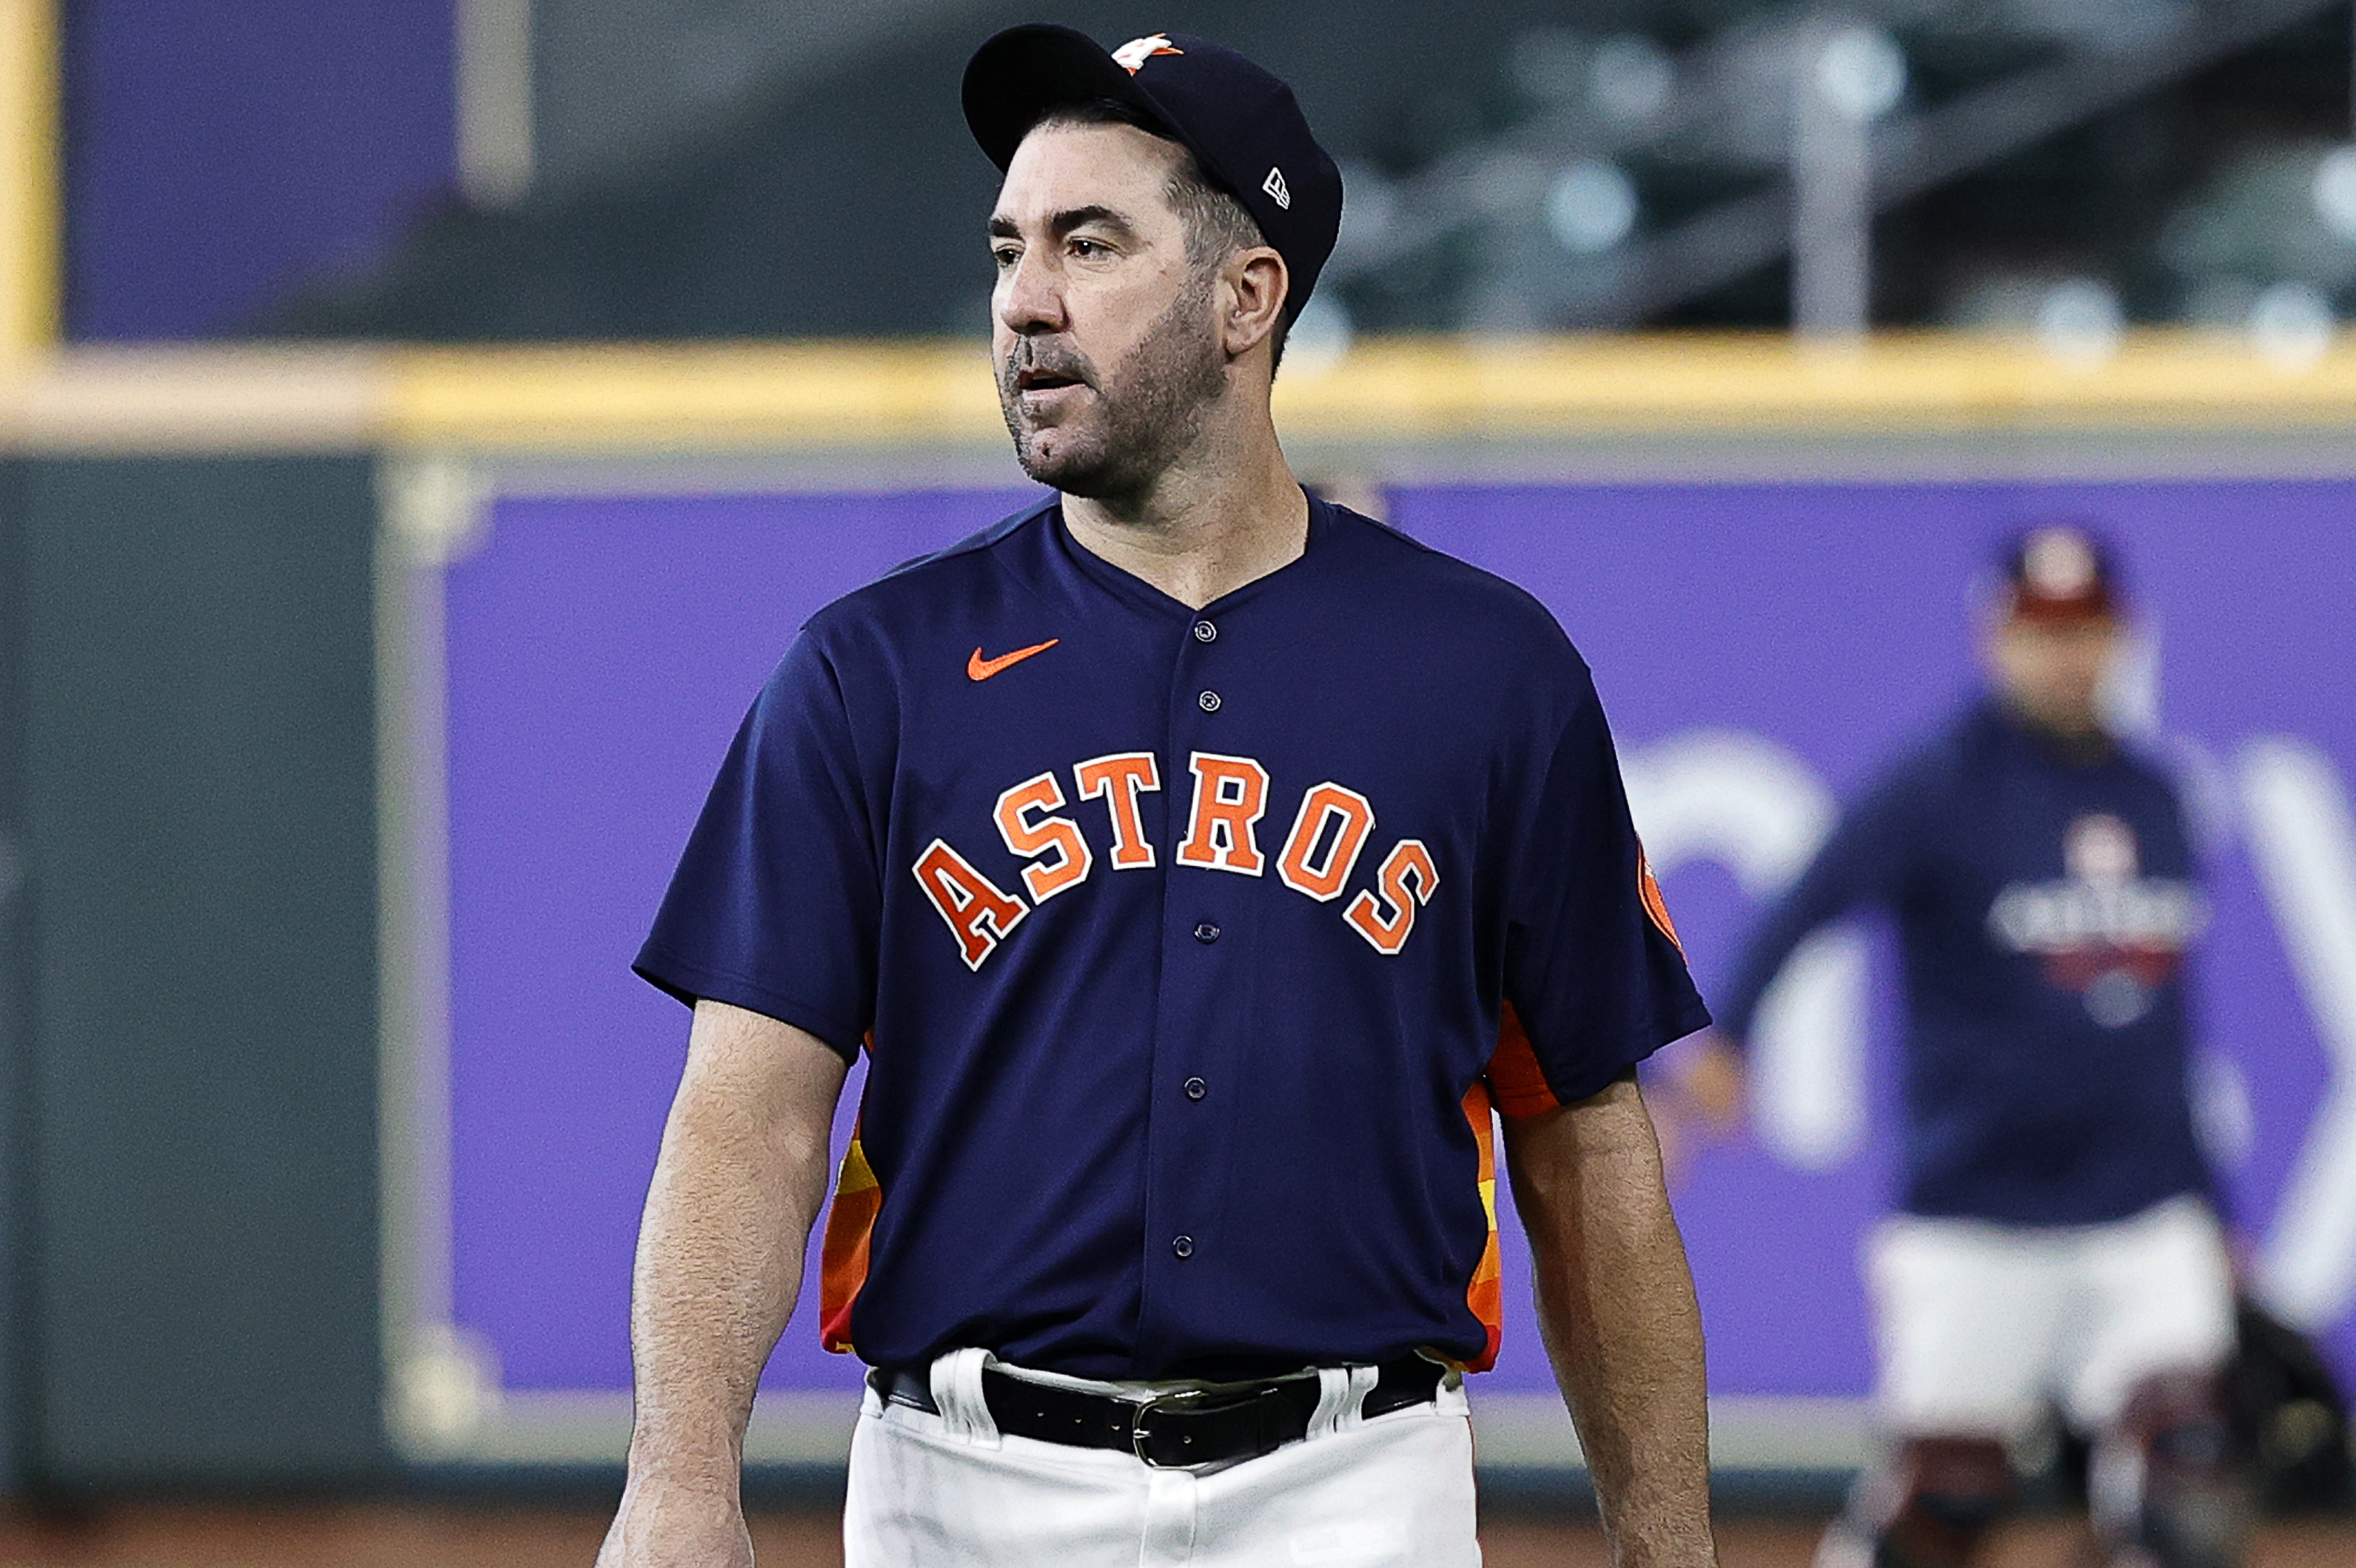 RUMOR: Another possible snag in potential Mets-Astros Justin